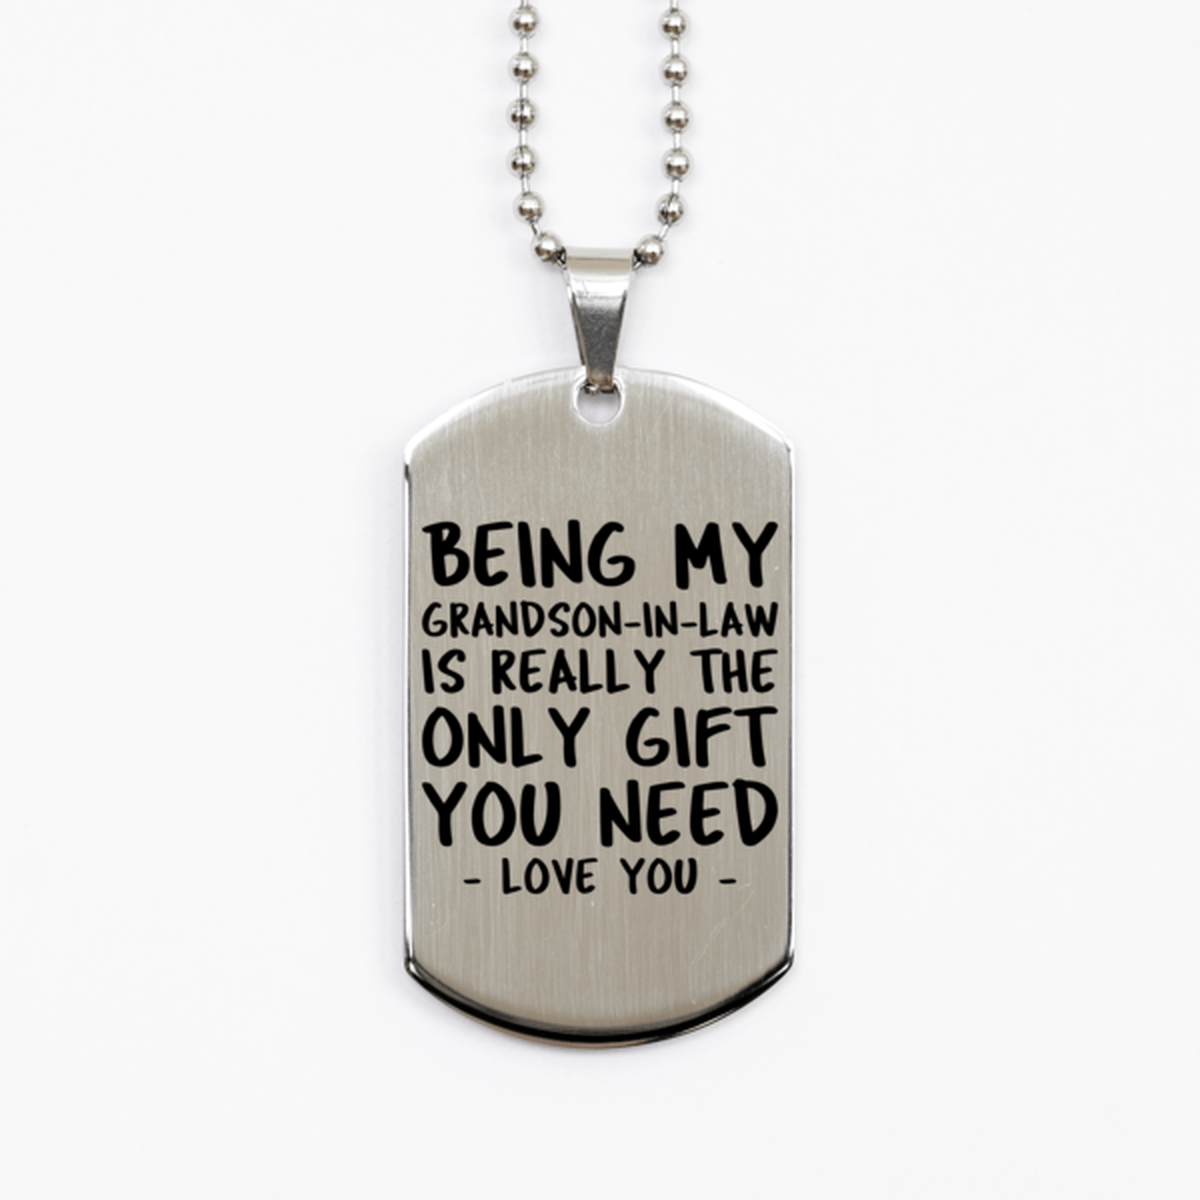 Funny Grandson-in-law Silver Dog Tag Necklace, Being My Grandson-in-law Is Really the Only Gift You Need, Best Birthday Gifts for Grandson-in-law